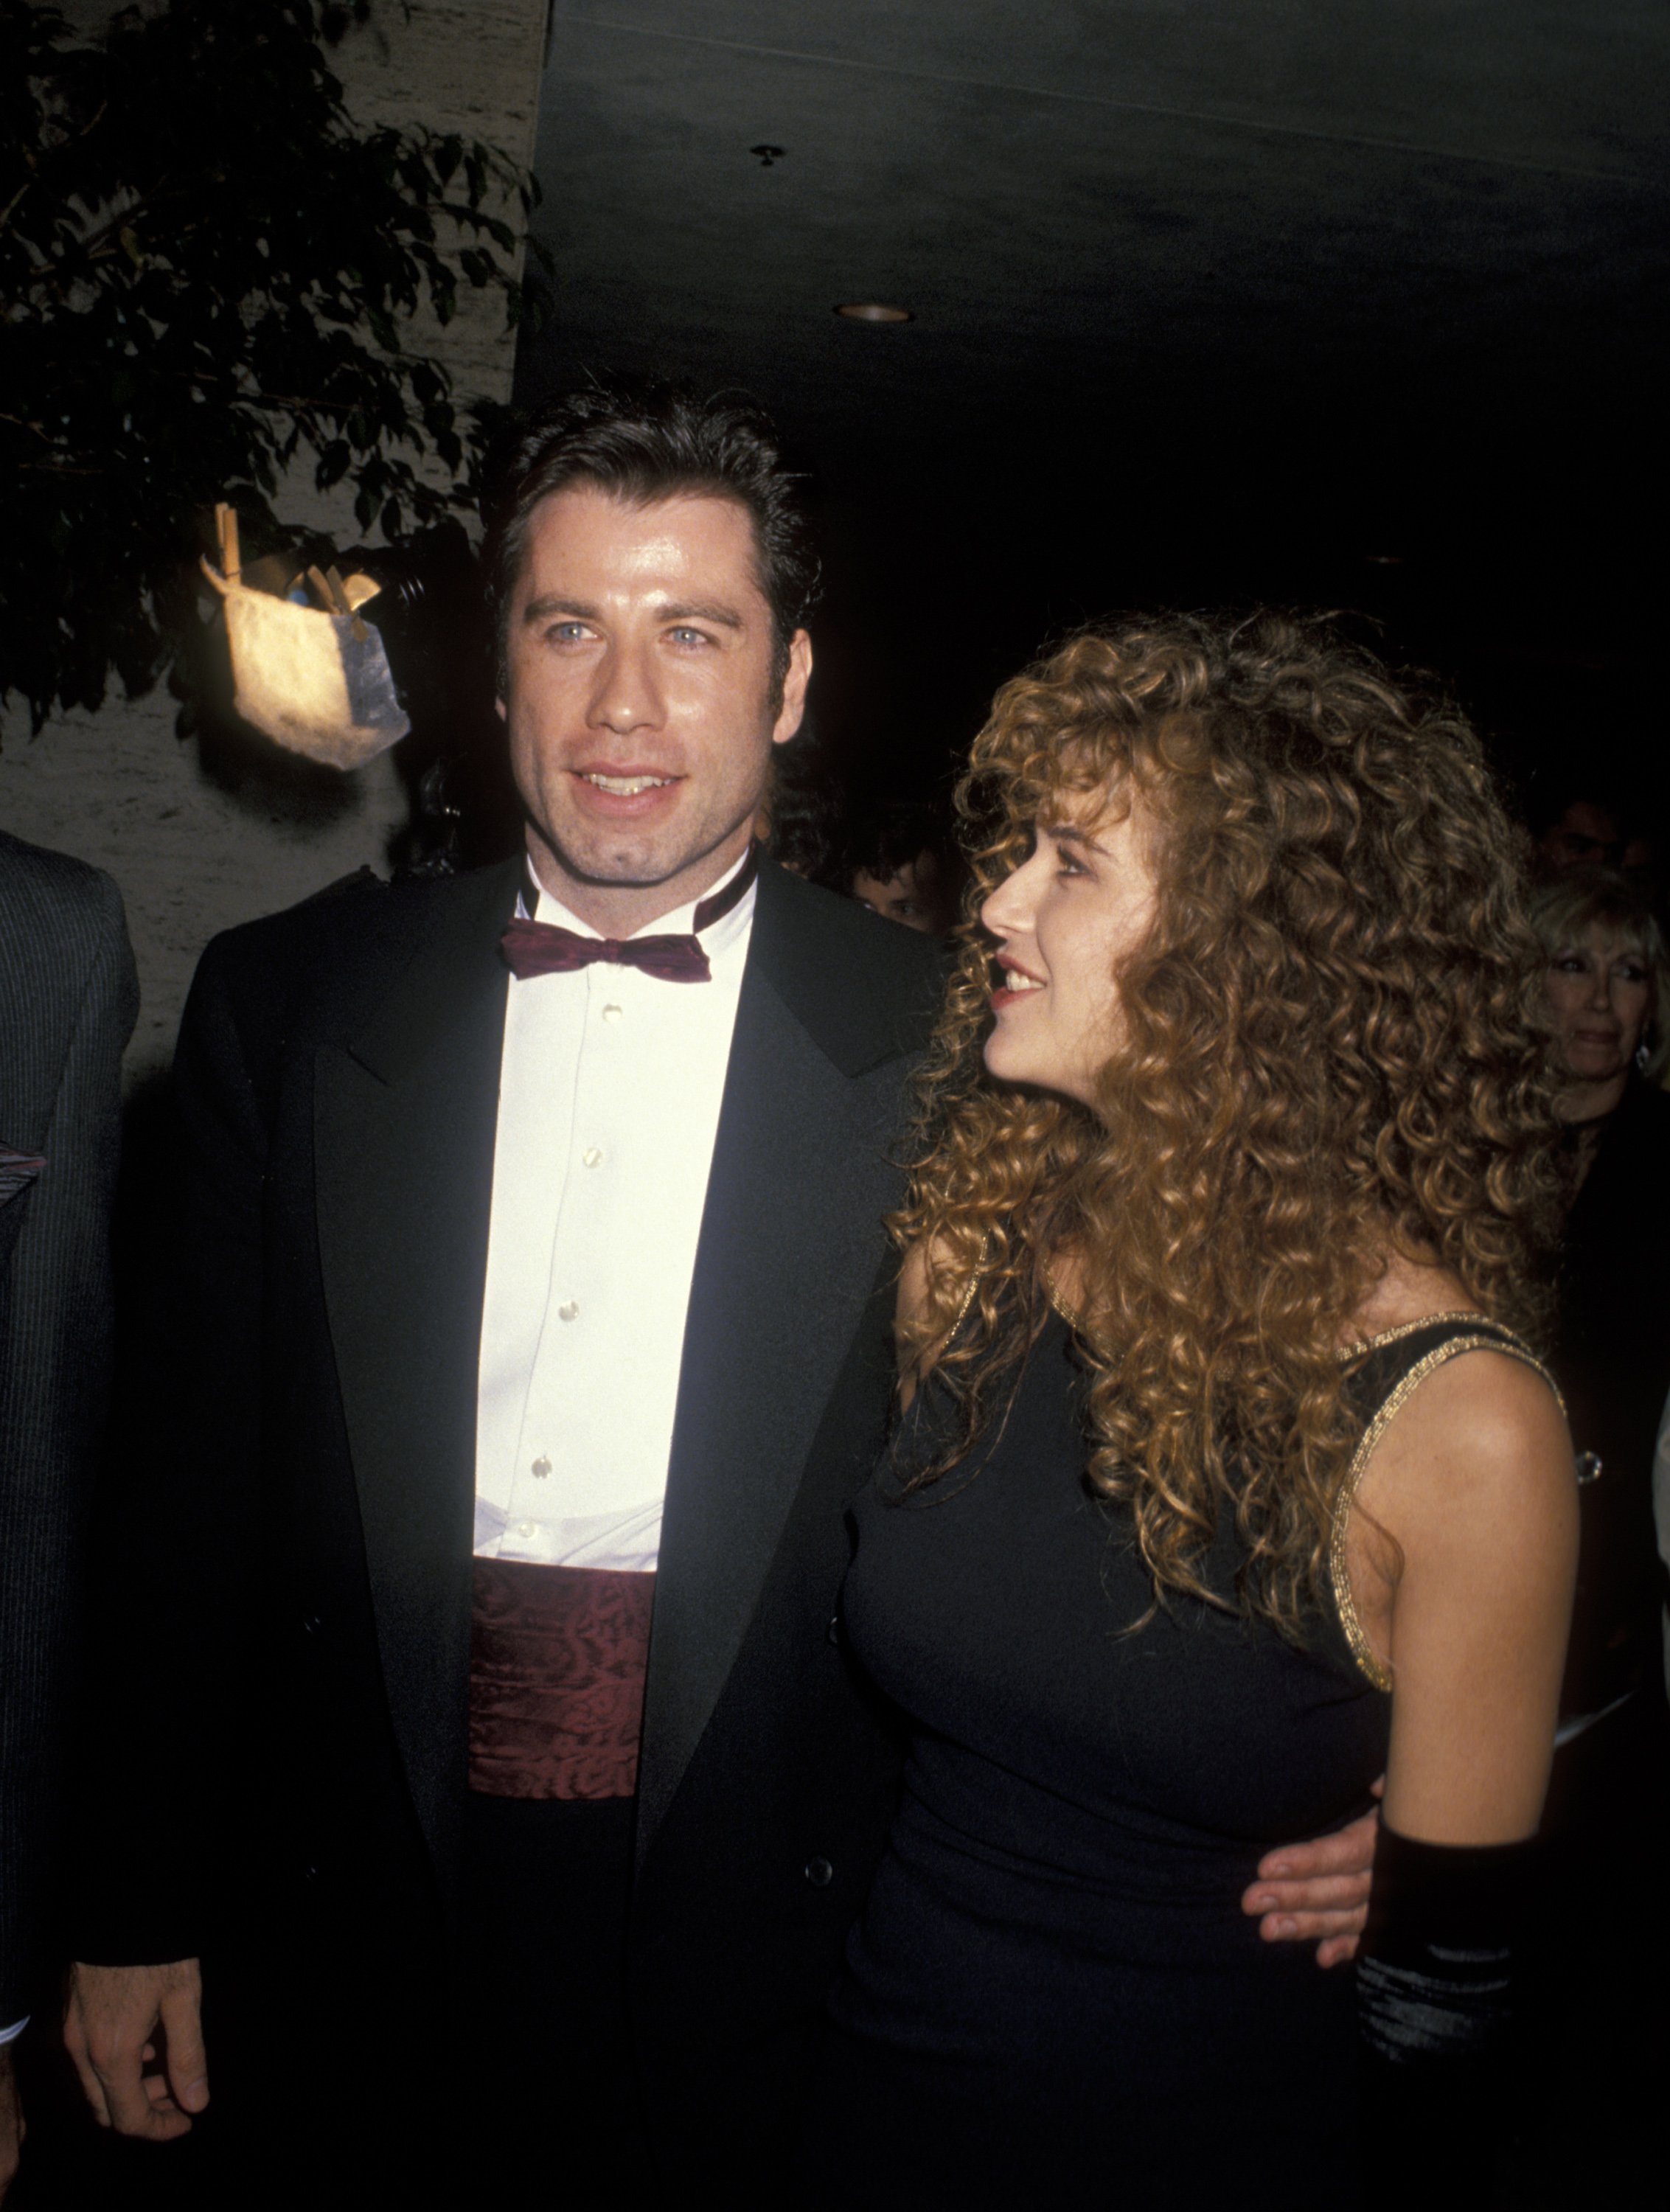 John Travolta and Kelly Preston in Los Angeles at The Plitt Theatre, 1990. | Source: Getty Images